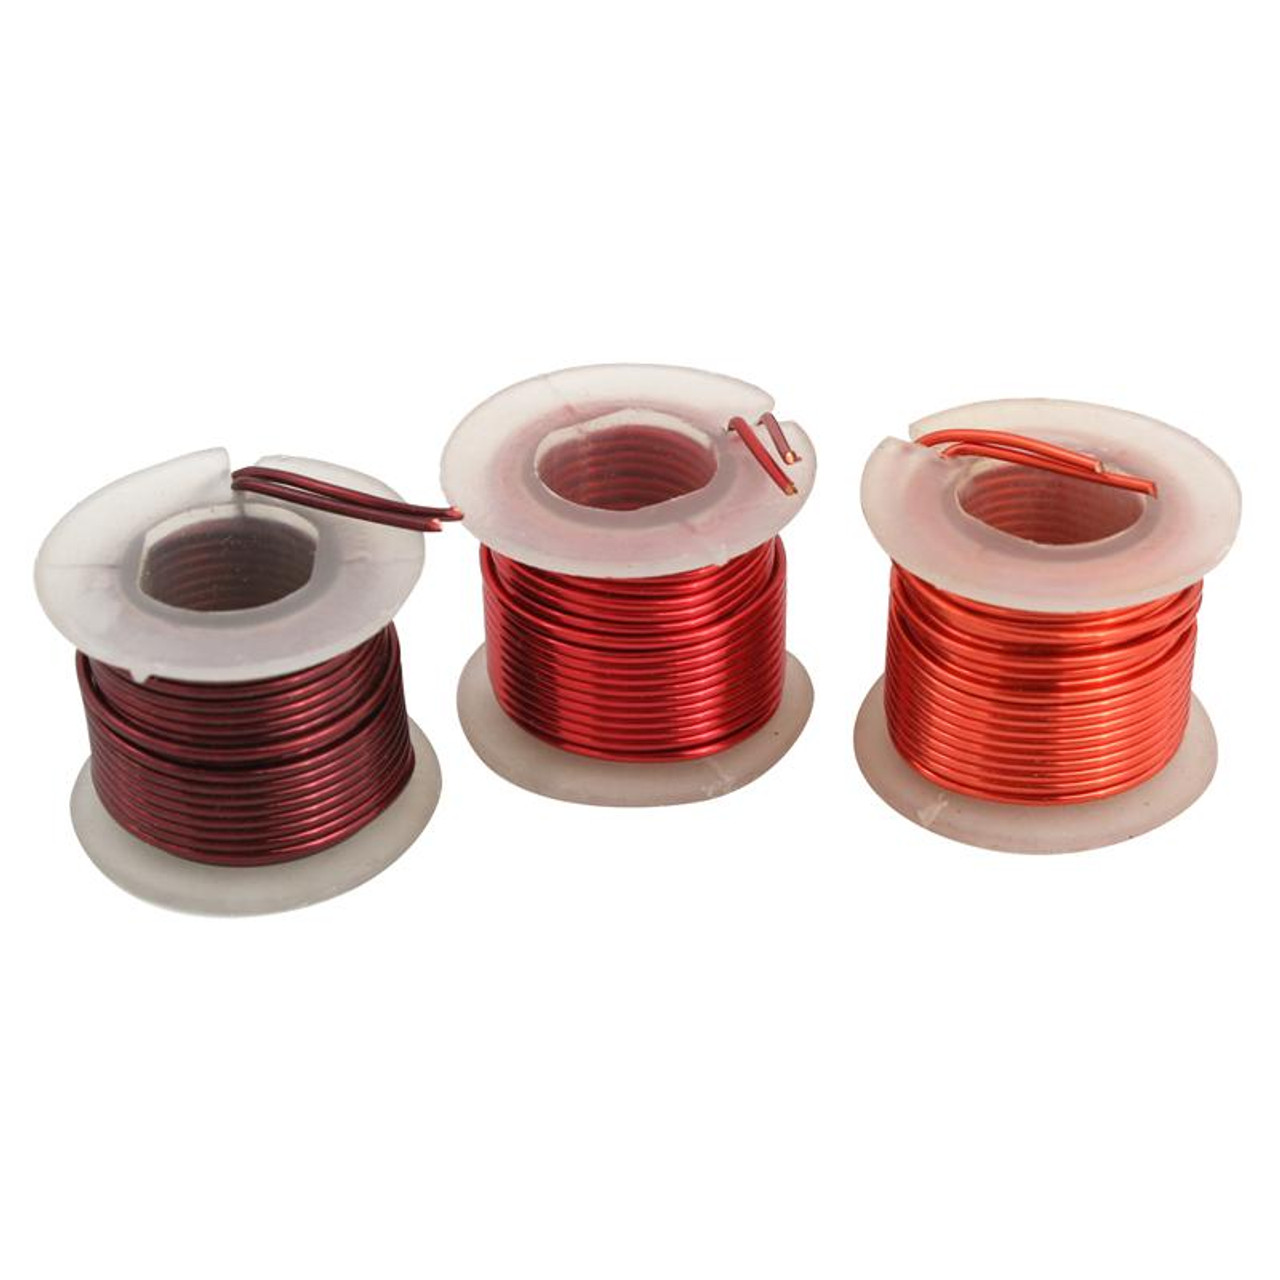 Artistic Wire Buy the Dozen Variety Pack of 12 Colored Copper